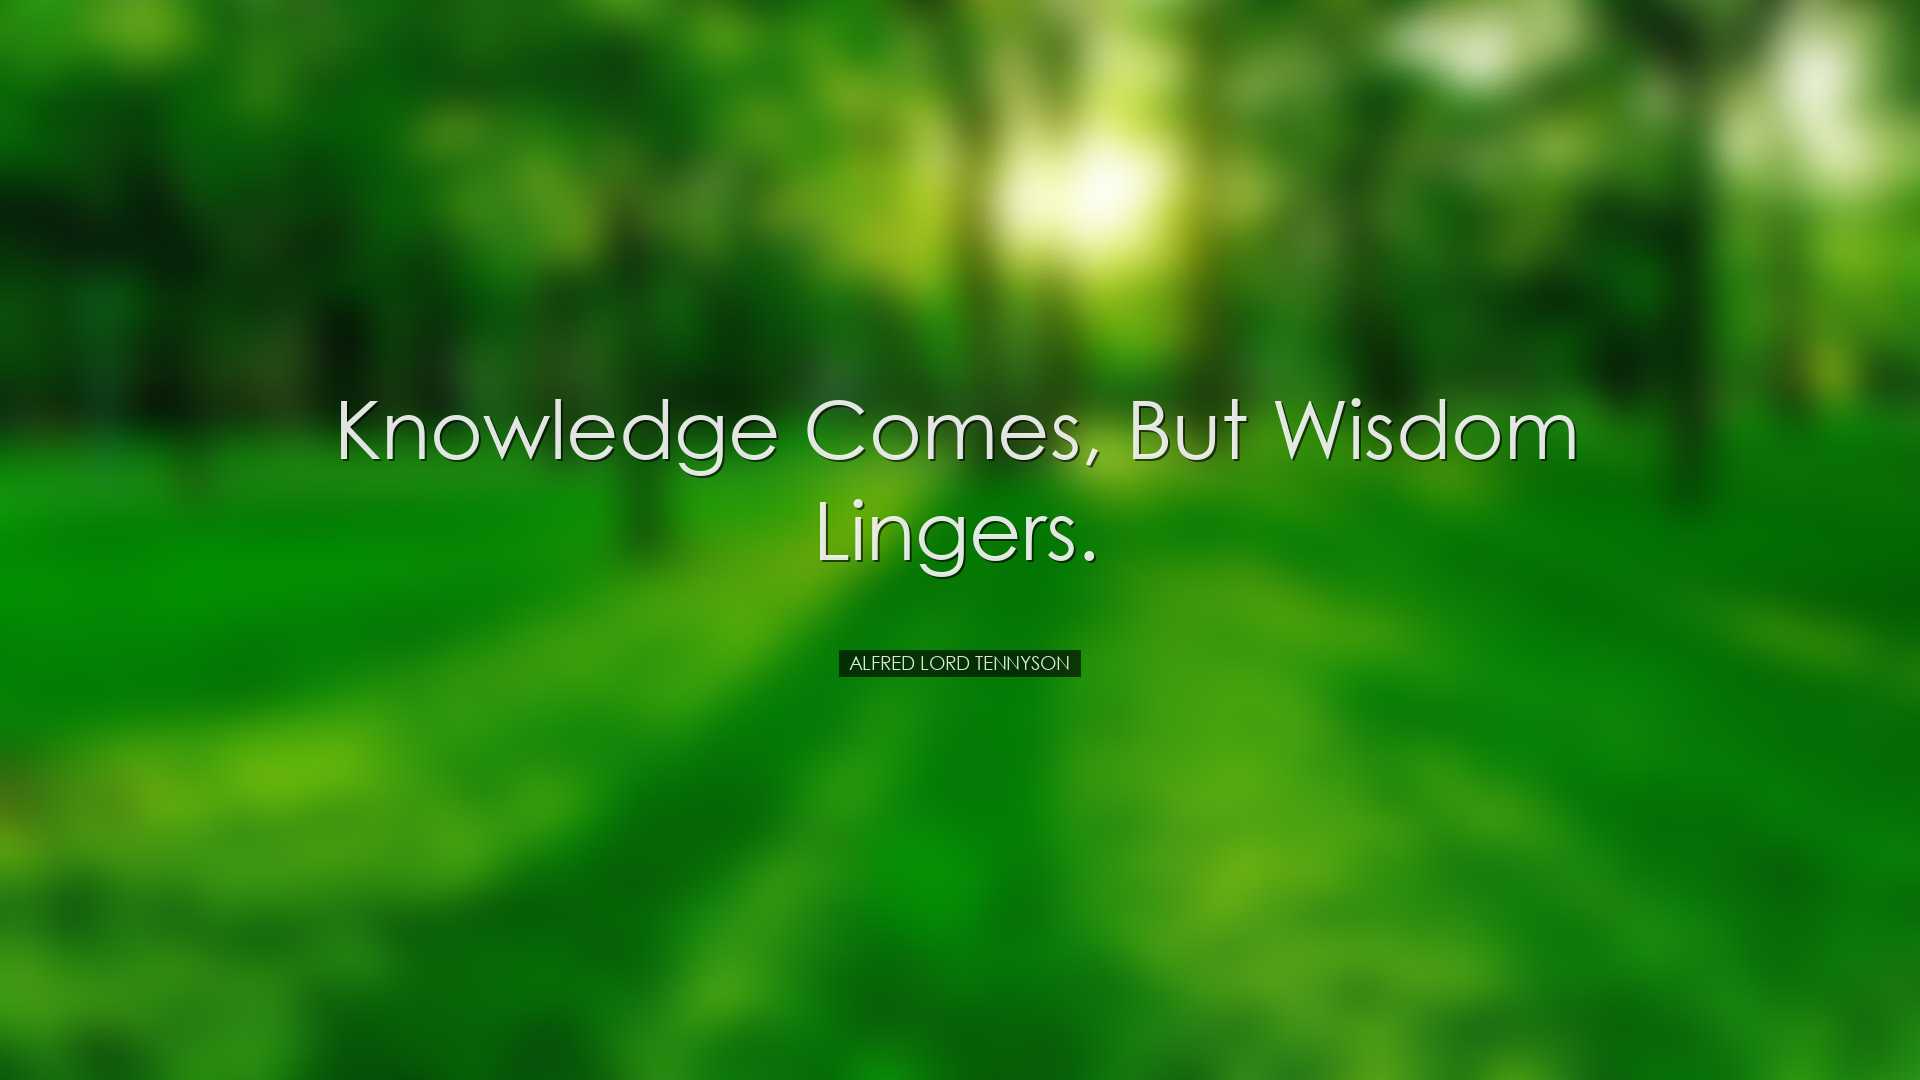 Knowledge comes, but wisdom lingers. - Alfred Lord Tennyson